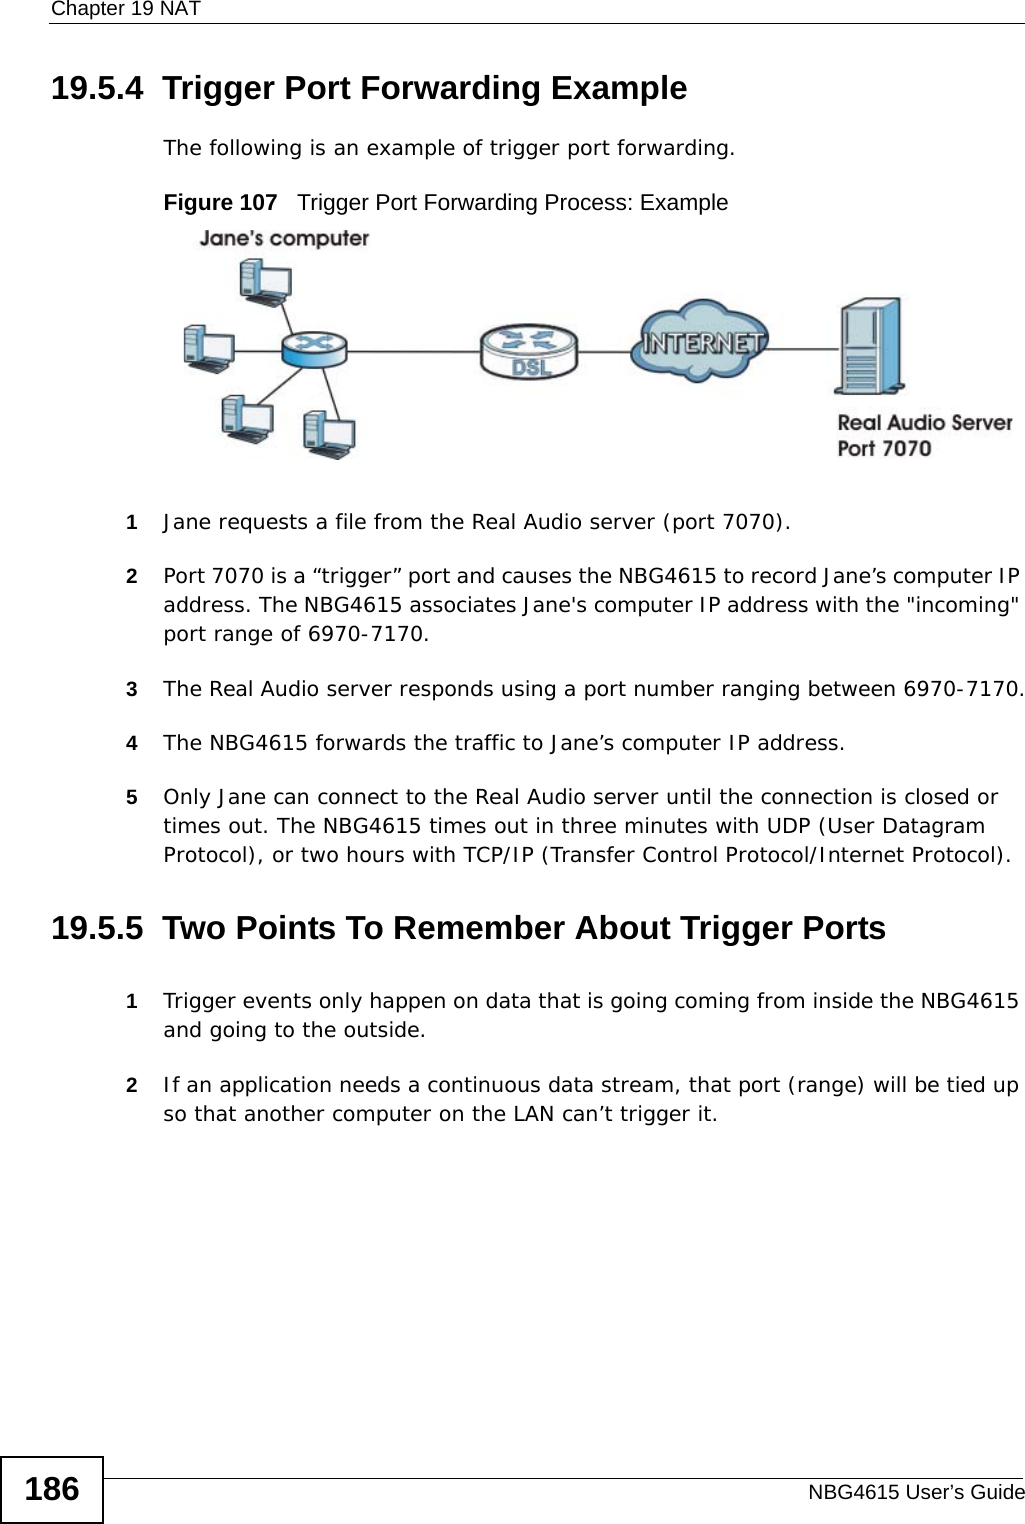 Chapter 19 NATNBG4615 User’s Guide18619.5.4  Trigger Port Forwarding Example The following is an example of trigger port forwarding.Figure 107   Trigger Port Forwarding Process: Example1Jane requests a file from the Real Audio server (port 7070).2Port 7070 is a “trigger” port and causes the NBG4615 to record Jane’s computer IP address. The NBG4615 associates Jane&apos;s computer IP address with the &quot;incoming&quot; port range of 6970-7170.3The Real Audio server responds using a port number ranging between 6970-7170.4The NBG4615 forwards the traffic to Jane’s computer IP address. 5Only Jane can connect to the Real Audio server until the connection is closed or times out. The NBG4615 times out in three minutes with UDP (User Datagram Protocol), or two hours with TCP/IP (Transfer Control Protocol/Internet Protocol). 19.5.5  Two Points To Remember About Trigger Ports1Trigger events only happen on data that is going coming from inside the NBG4615 and going to the outside.2If an application needs a continuous data stream, that port (range) will be tied up so that another computer on the LAN can’t trigger it.